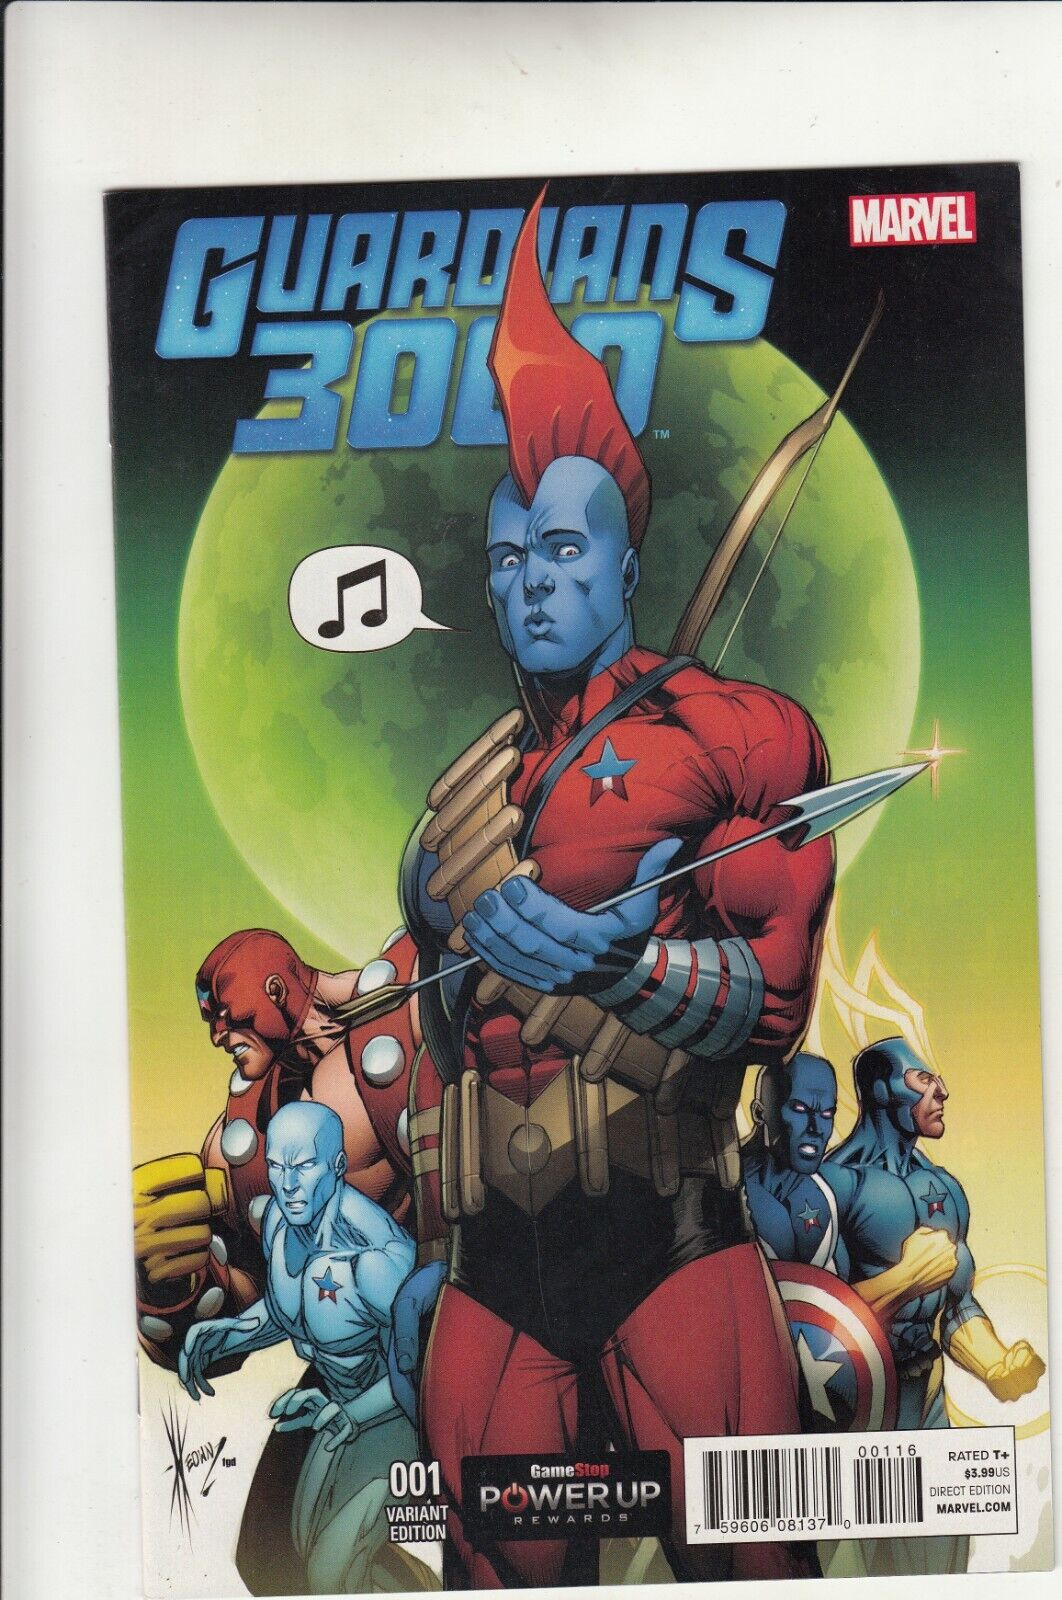 Guardians 3000 Gamestop Variant Cover #1 Comic Book Marvel Very Fine 